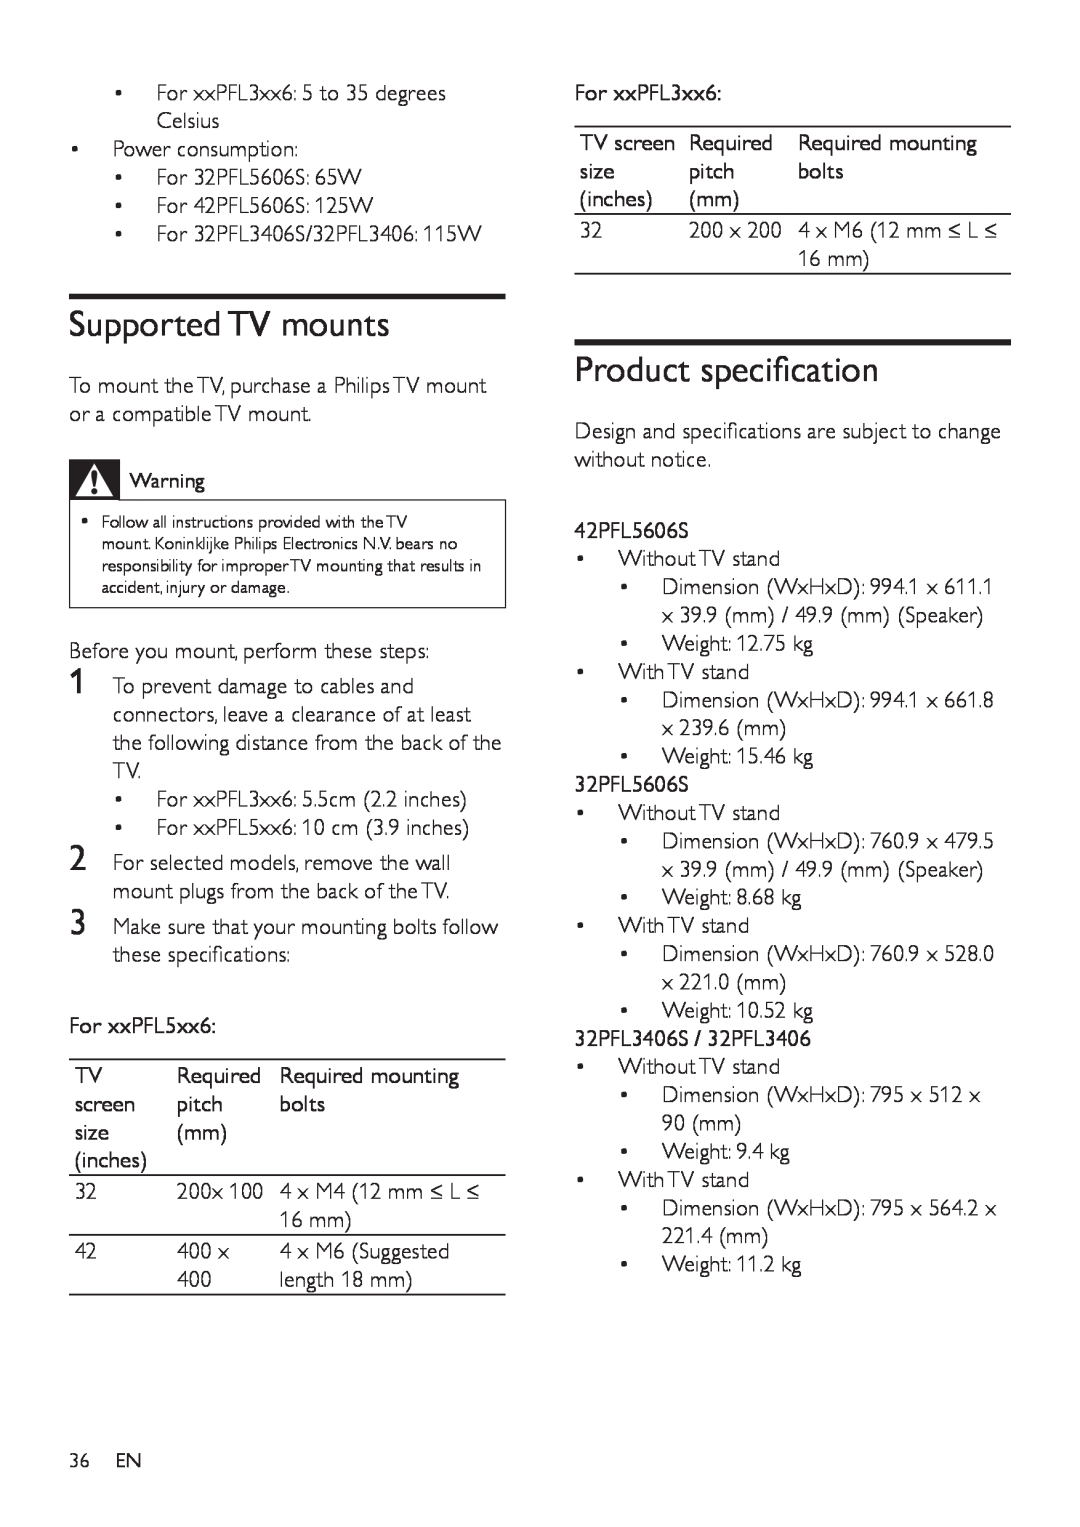 Philips 42PFL5606, 32PFL3406 Supported TV mounts, Product specification, For xxPFL3xx6 5.5cm 2.2 inches, size, 36 EN 